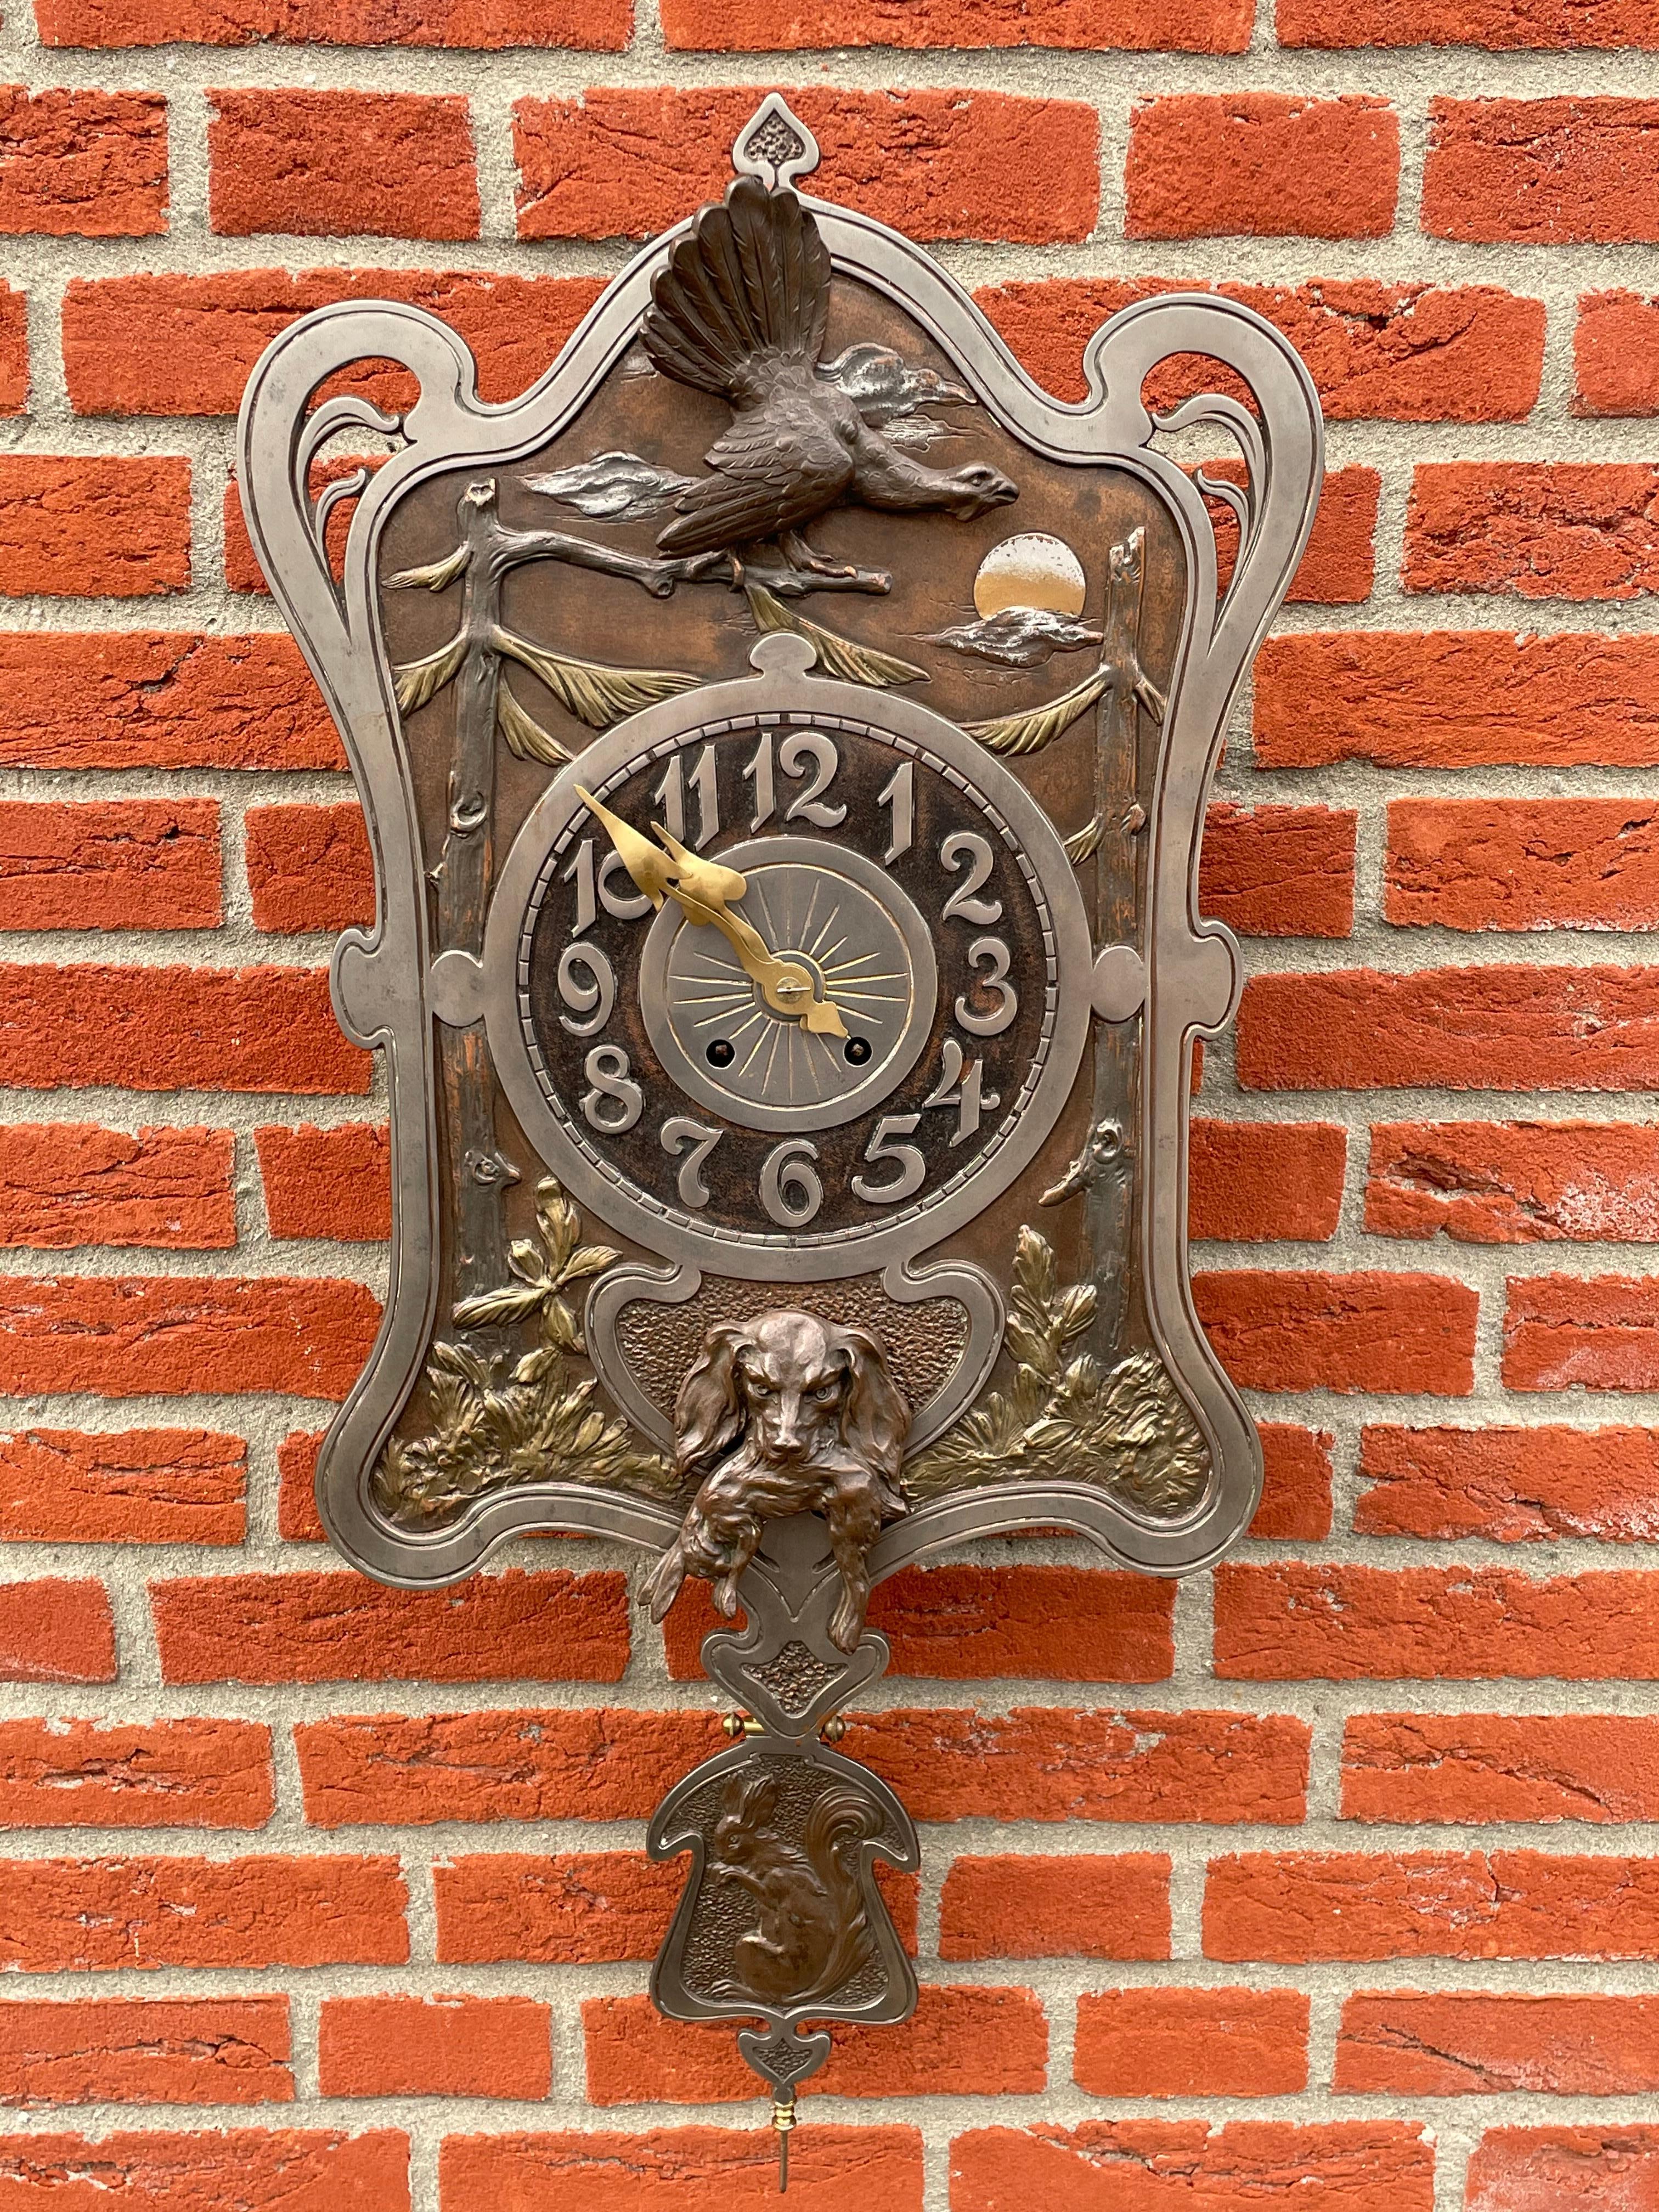 Large and stunning, top quality handcrafted antique wall clock.

This one of a kind hunting clock reveils the quality (both in design and details) that the Arts and Crafts style is known and collected for. This work of time telling art comes with an